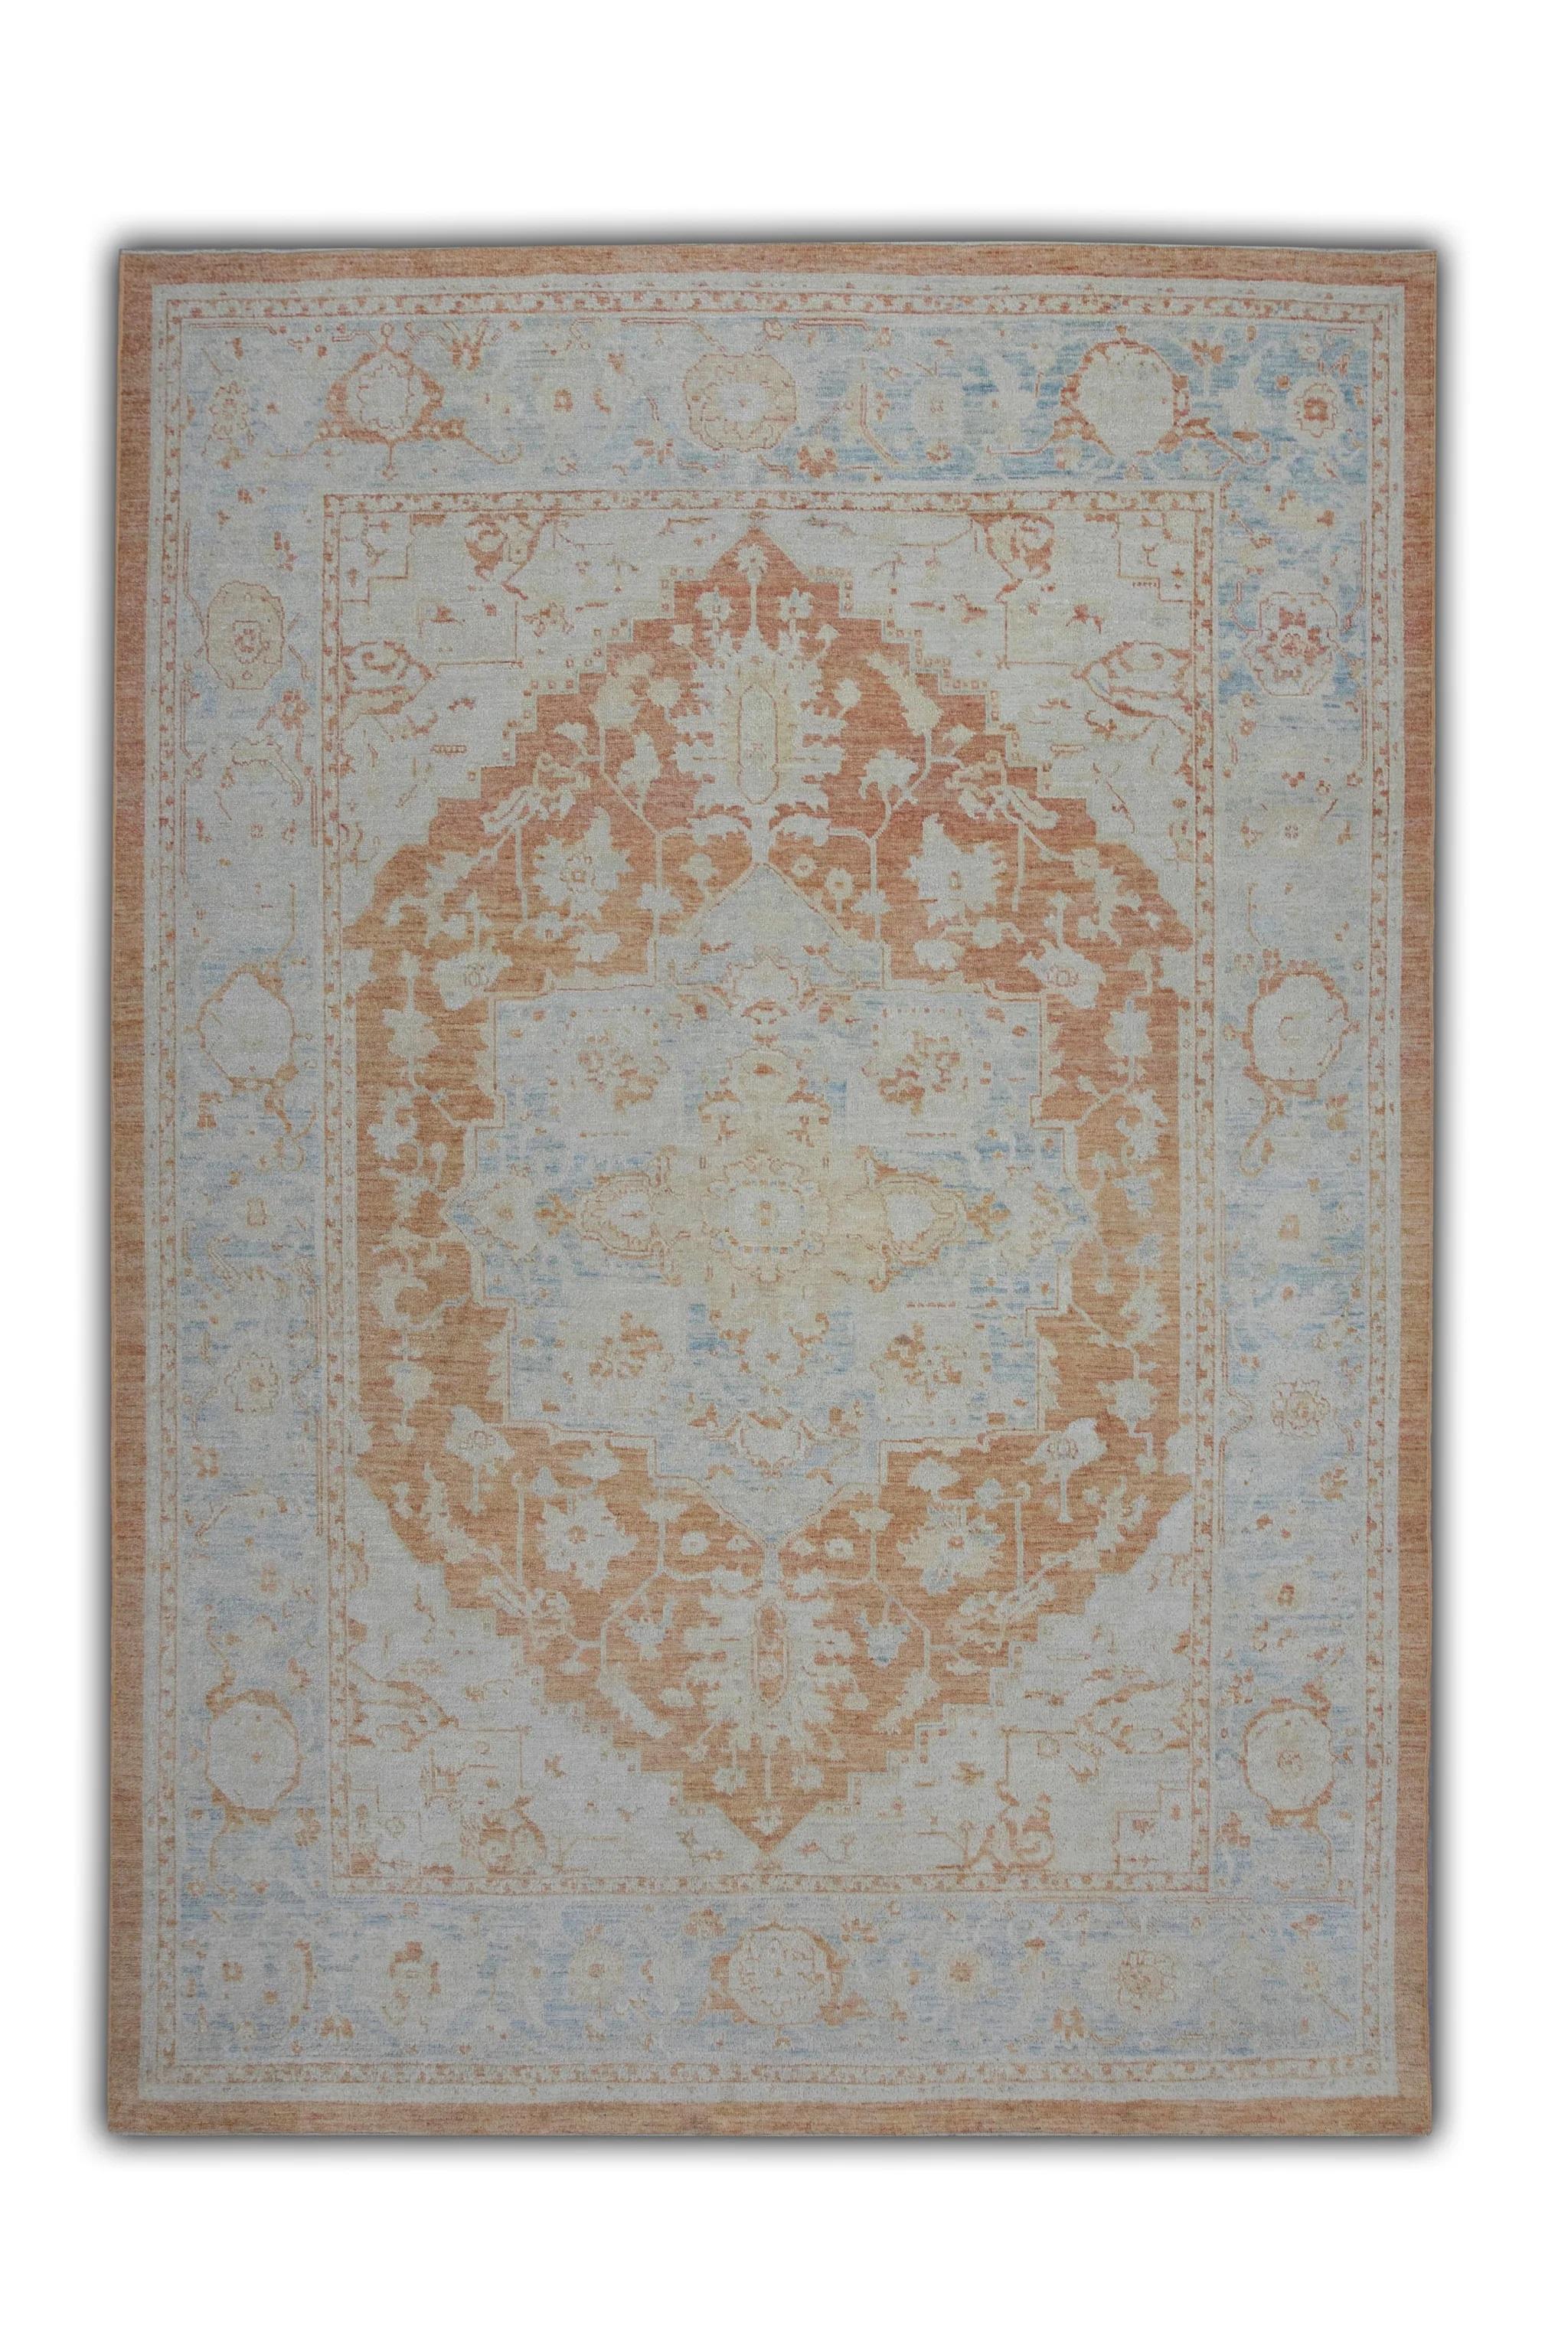 Floral Turkish Finewoven Wool Oushak Rug in Baby Blue and Salmon 7'9